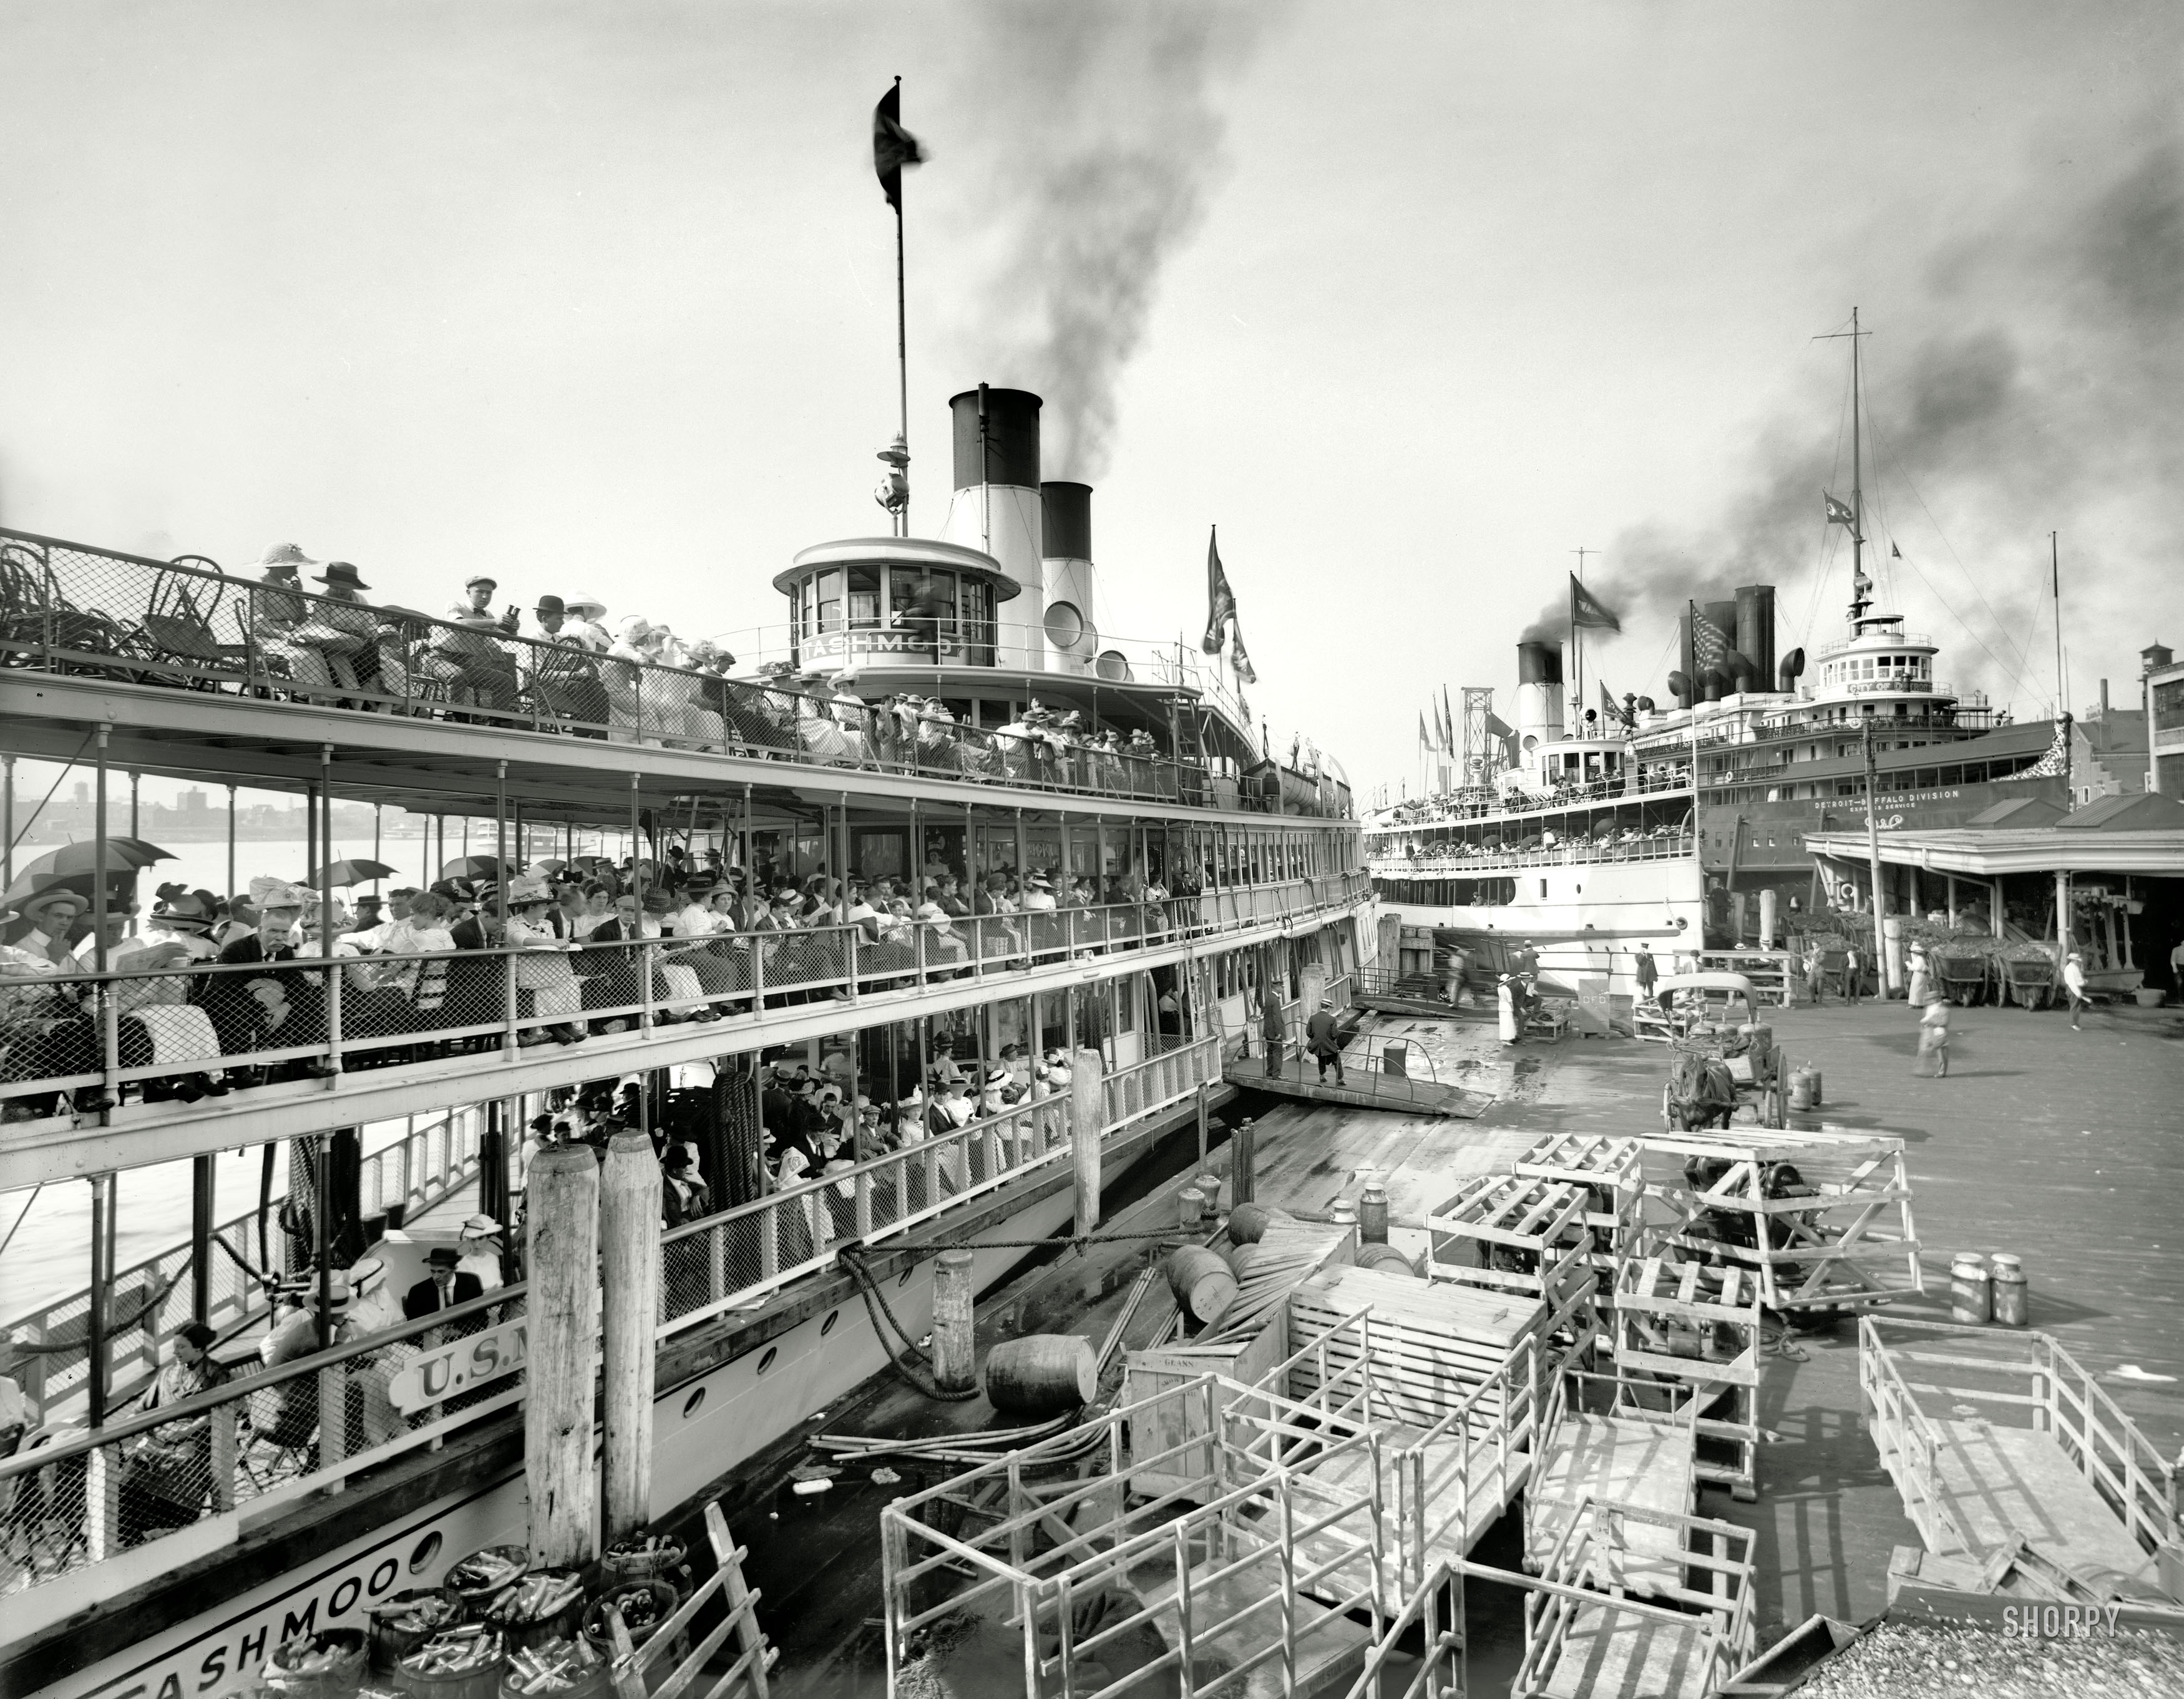 Detroit, Michigan, circa 1912. "Daily river excursion steamers. Sidewheelers Tashmoo, Owana and City of Detroit III at White Star Line dock." 8x10 inch dry plate glass negative, Detroit Publishing Company. View full size.